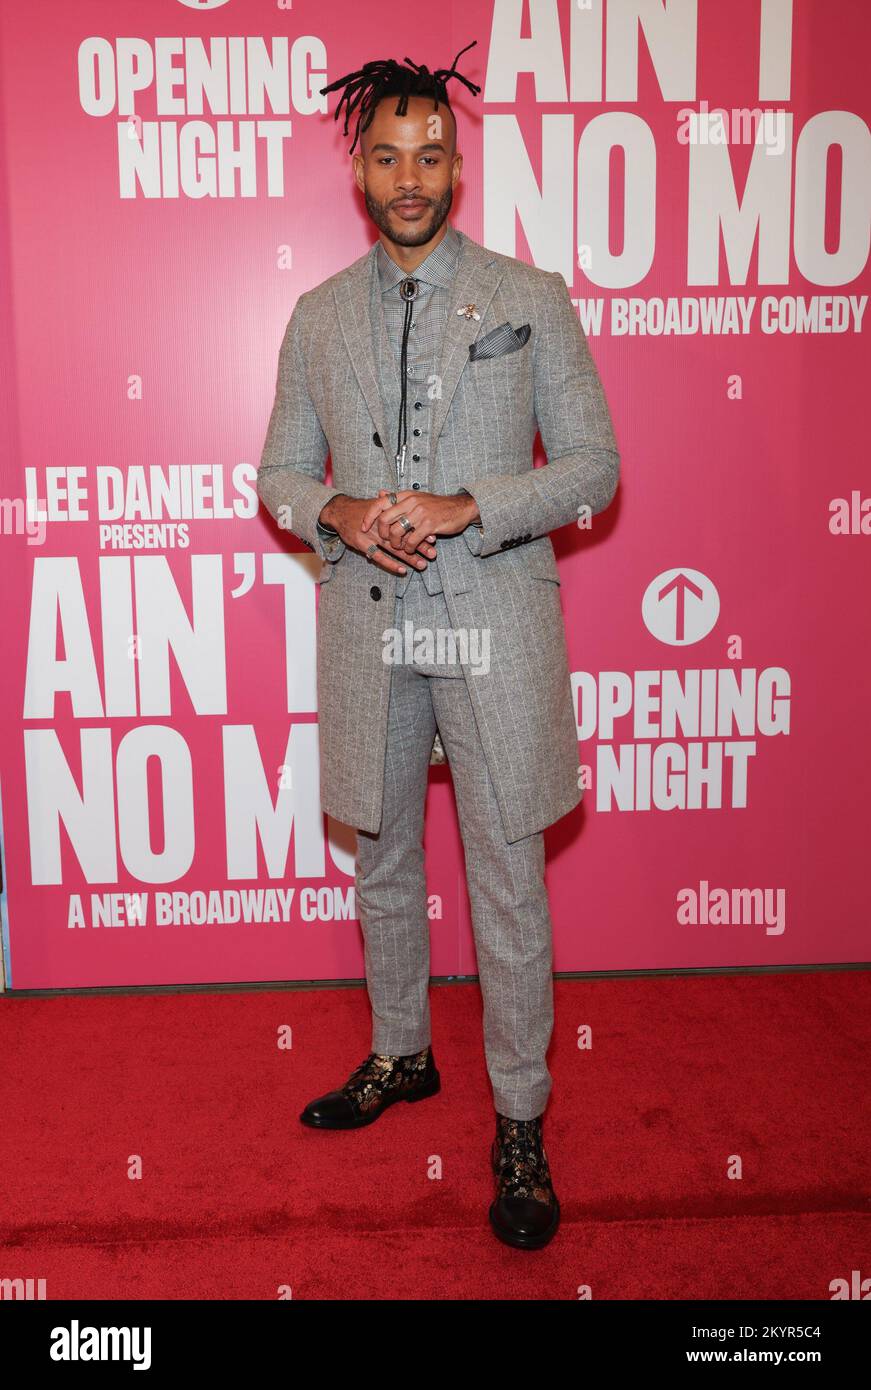 New York, NY, USA. 1st Dec, 2022. Michael Rishawn at arrivals for AIN'T NO MO' Opening Night on Broadway, Belasco Theatre, New York, NY December 1, 2022. Credit: CJ Rivera/Everett Collection/Alamy Live News Stock Photo